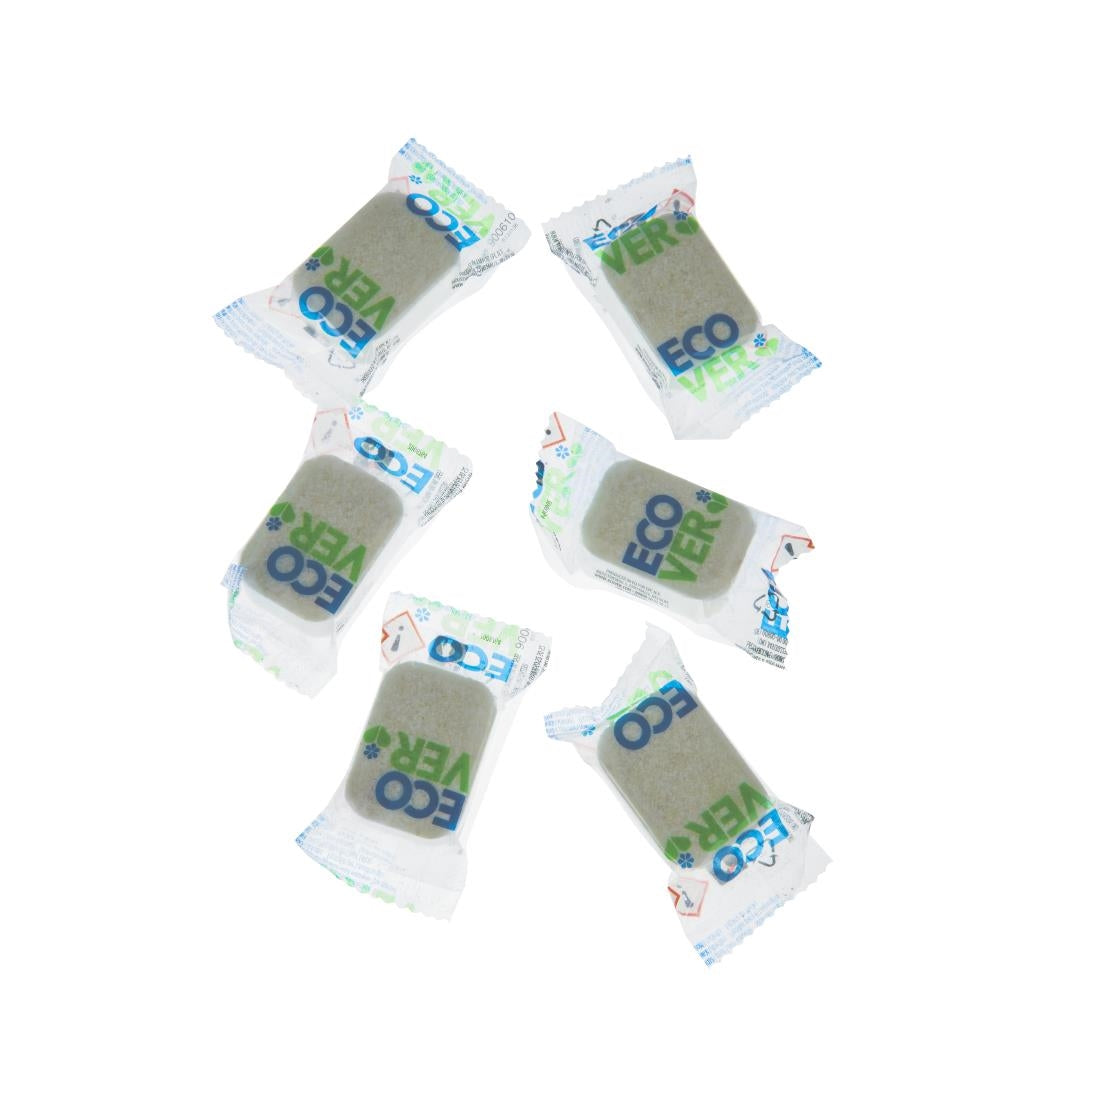 GG200 Ecover Dishwasher Detergent Tablets (70 Pack) JD Catering Equipment Solutions Ltd